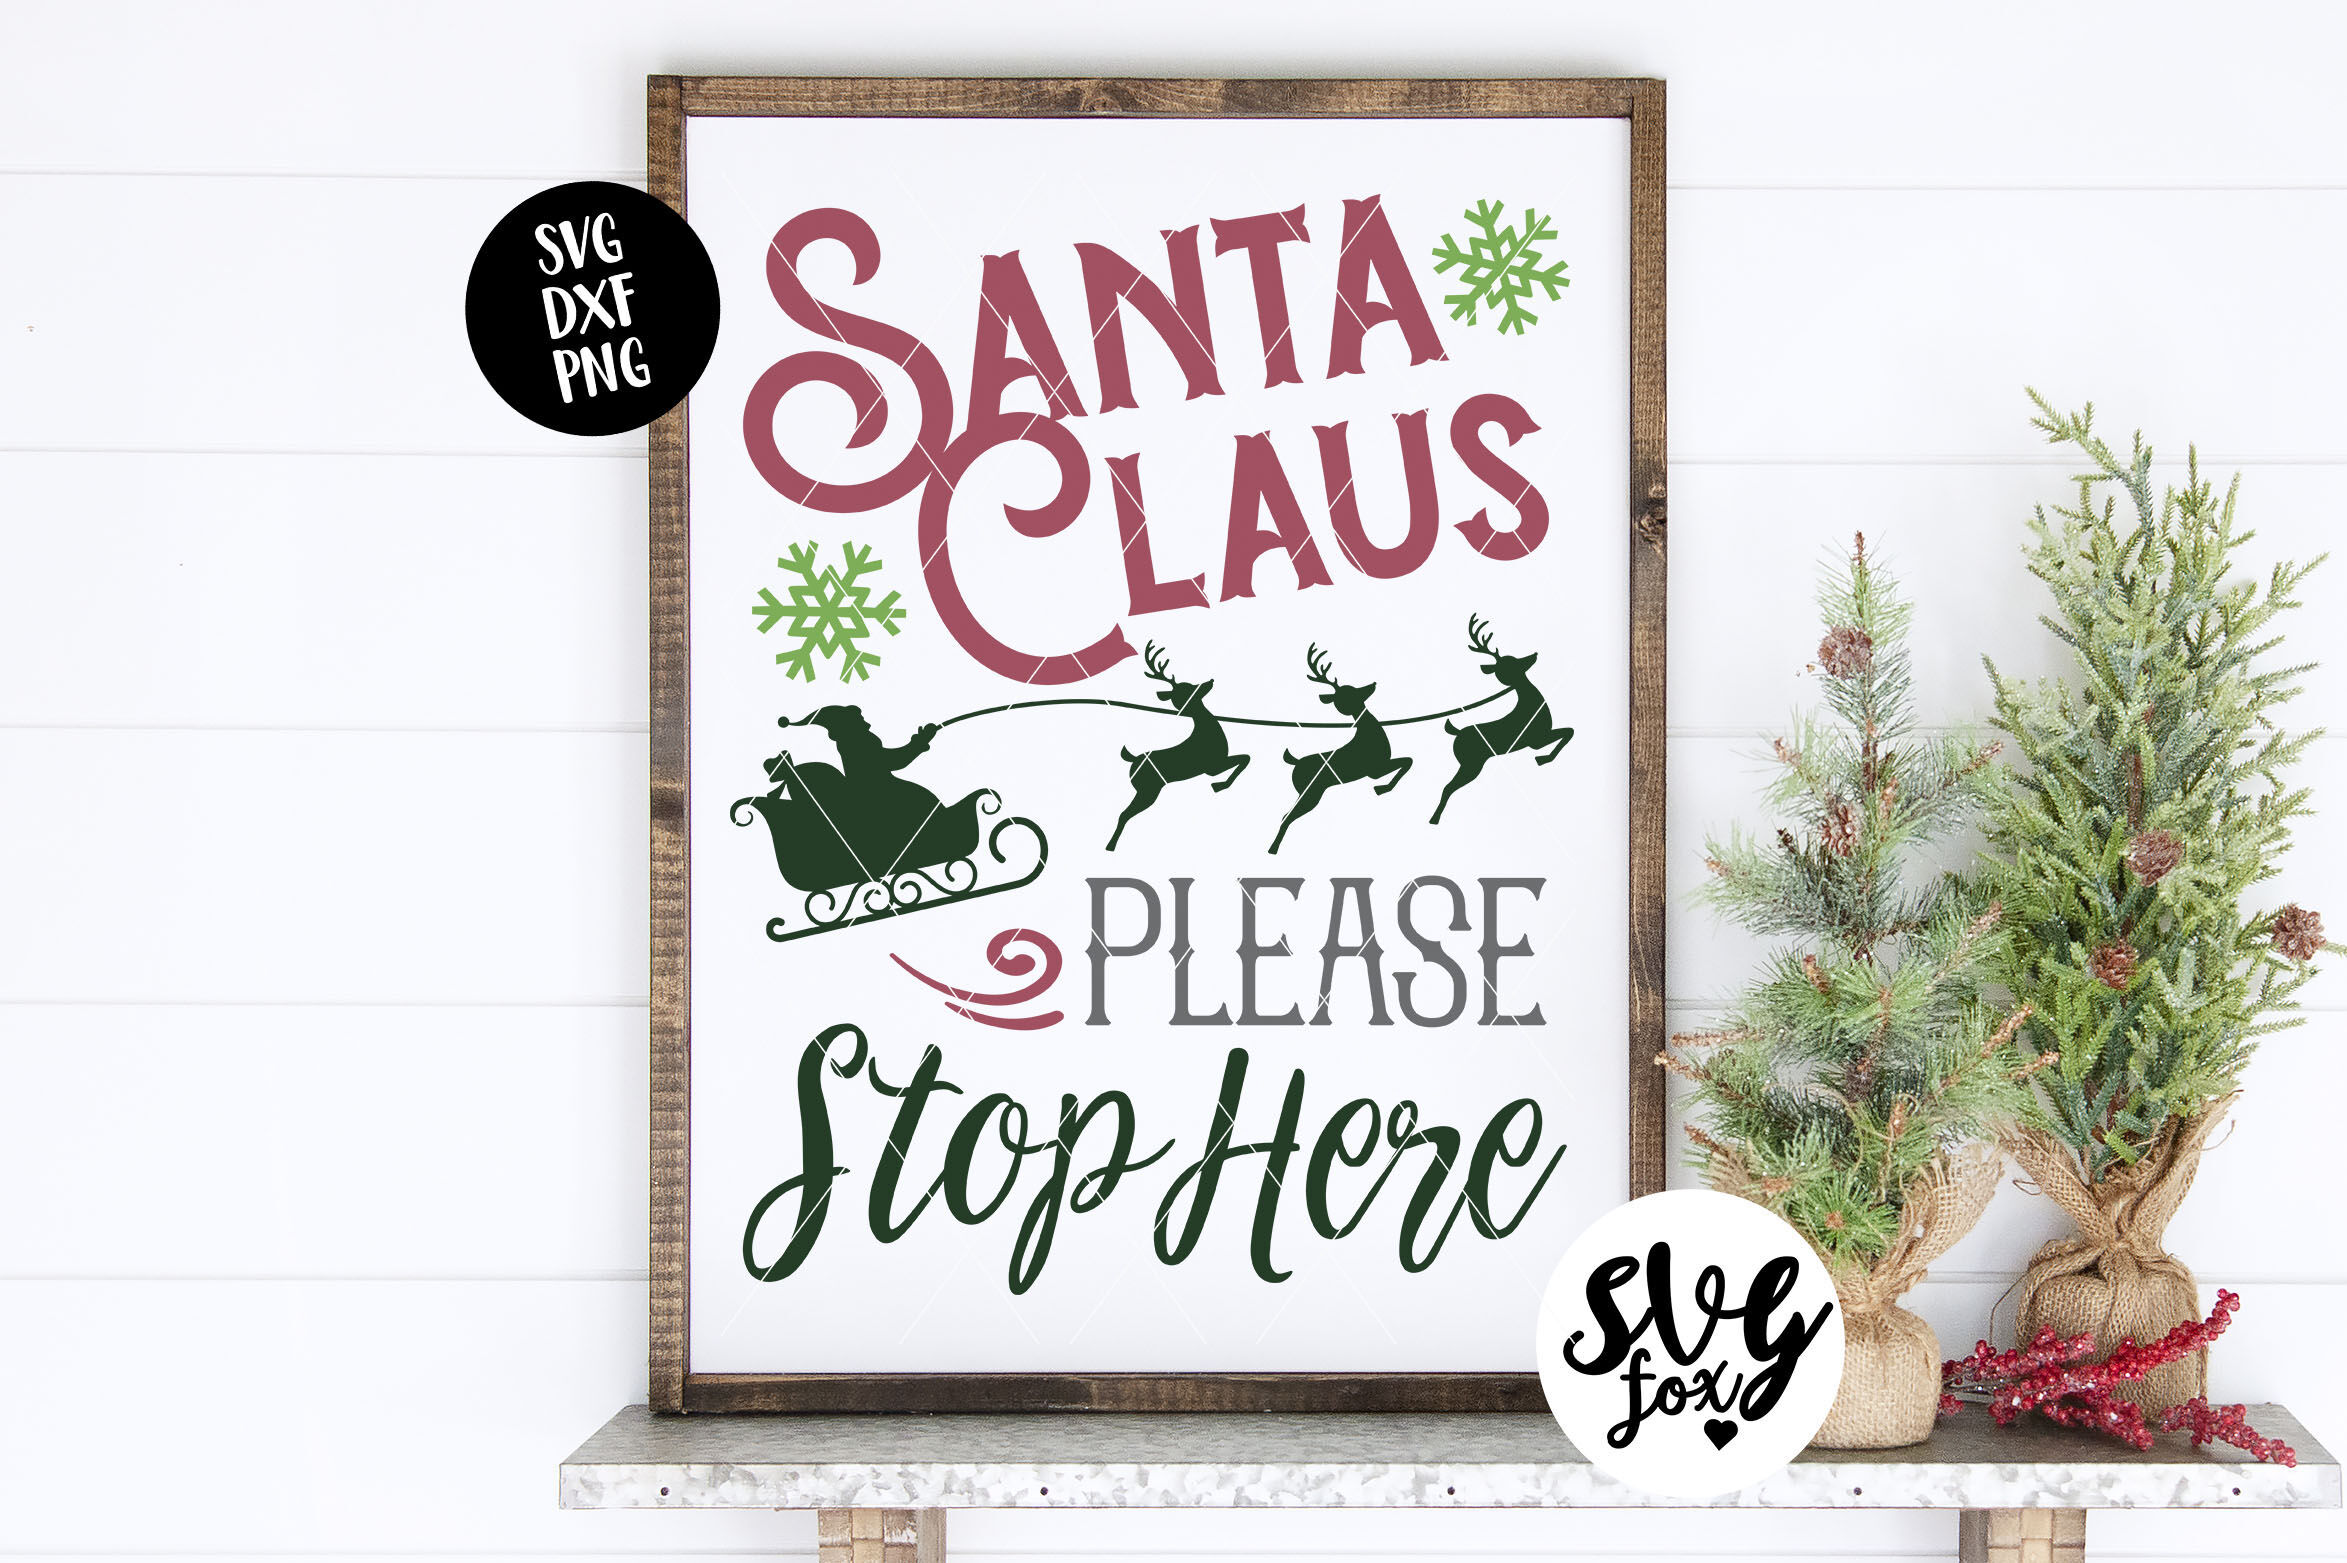 Santa Claus Please Stop Here Christmas Sign Svg Dxf Png By Svgfox Thehungryjpeg Com